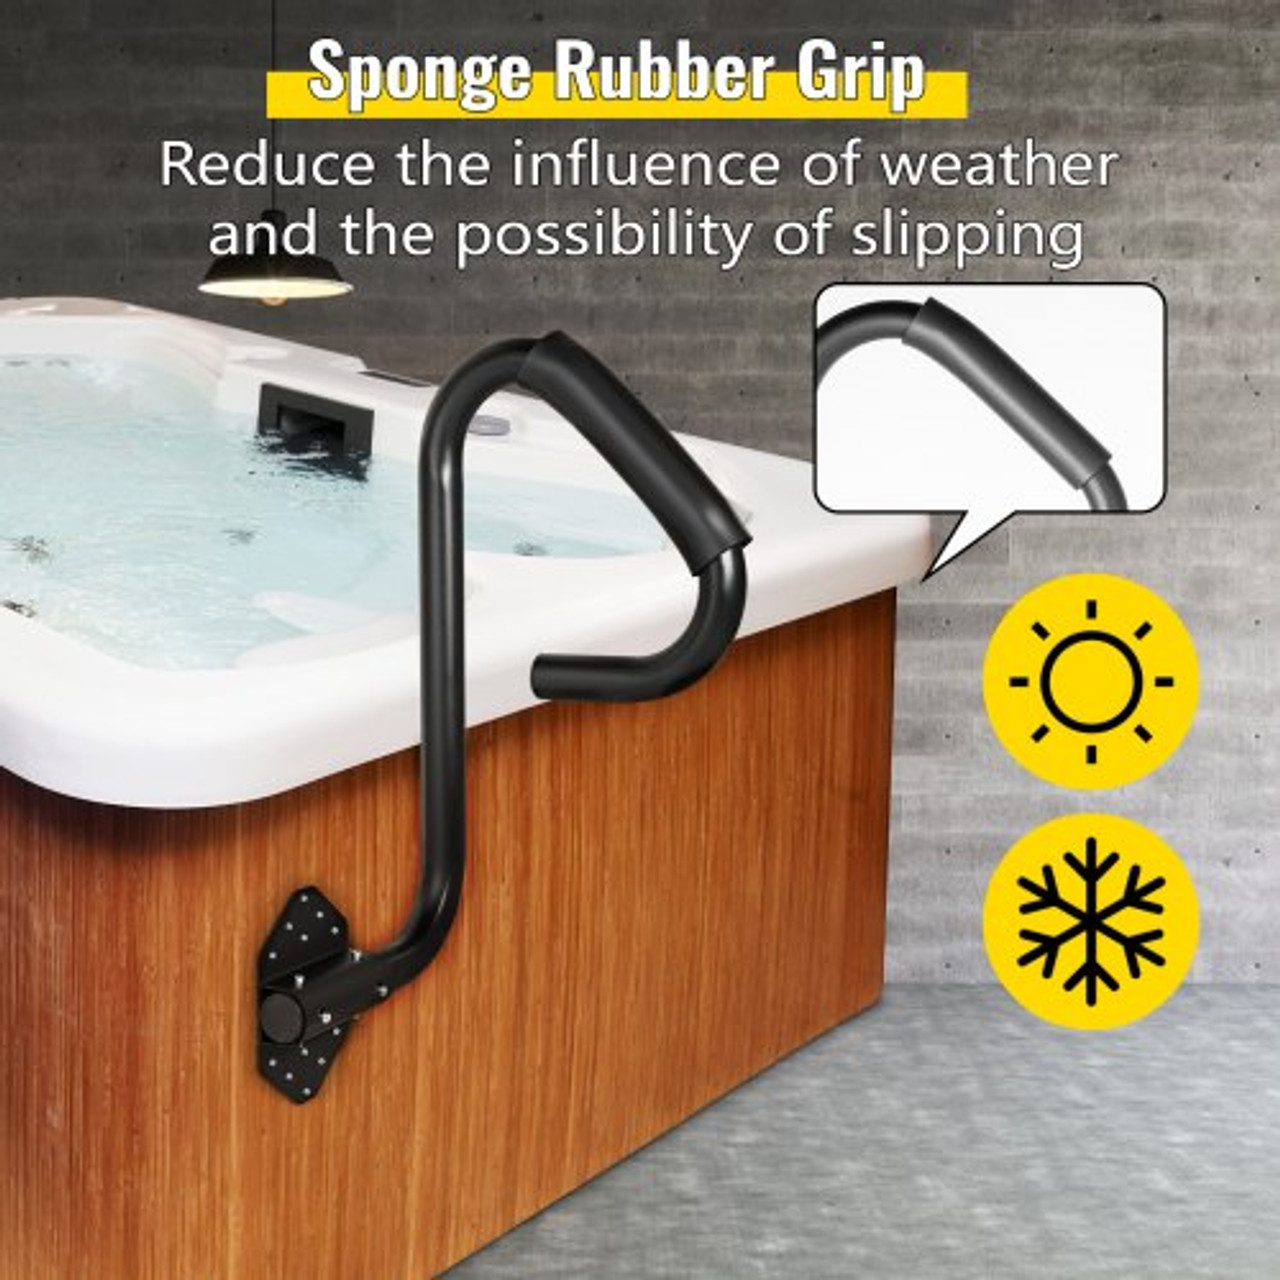 Hot Tub Handrail 600LBS Capacity Spa Safety Rail Stationary Heavy Iron Under Mount Handrail Hot Rail with Sponge Rubber Grip Matte Design Hot Rail Tube for Access Spa